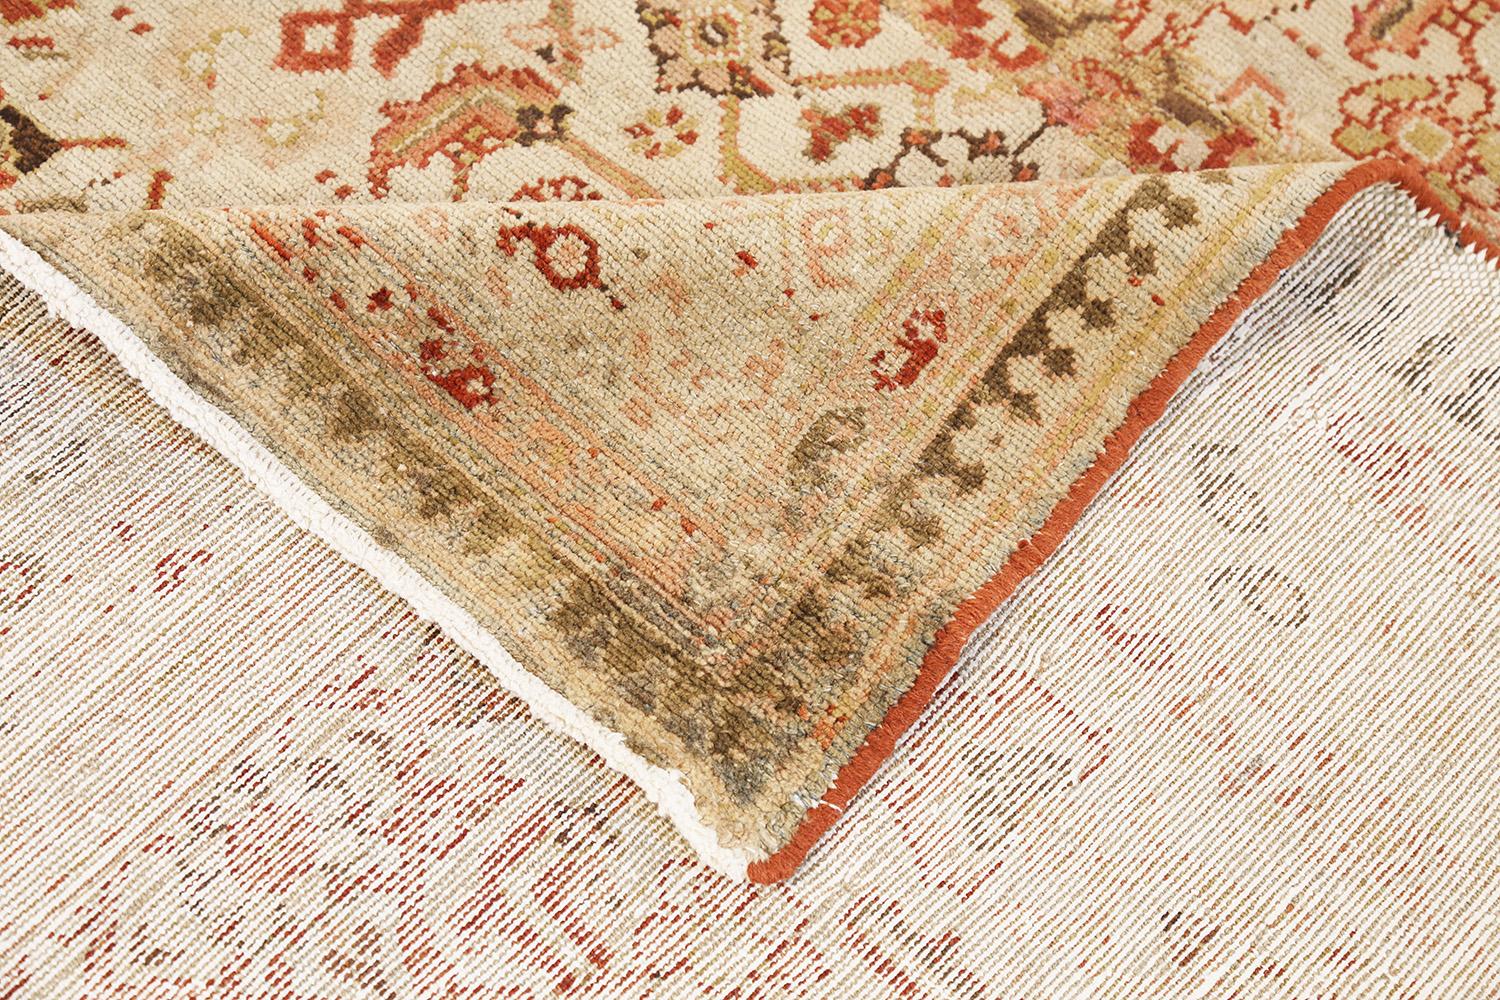 Hand-Woven Antique Persian Malayer Rug with Red and Beige Floral Details on Ivory Field For Sale